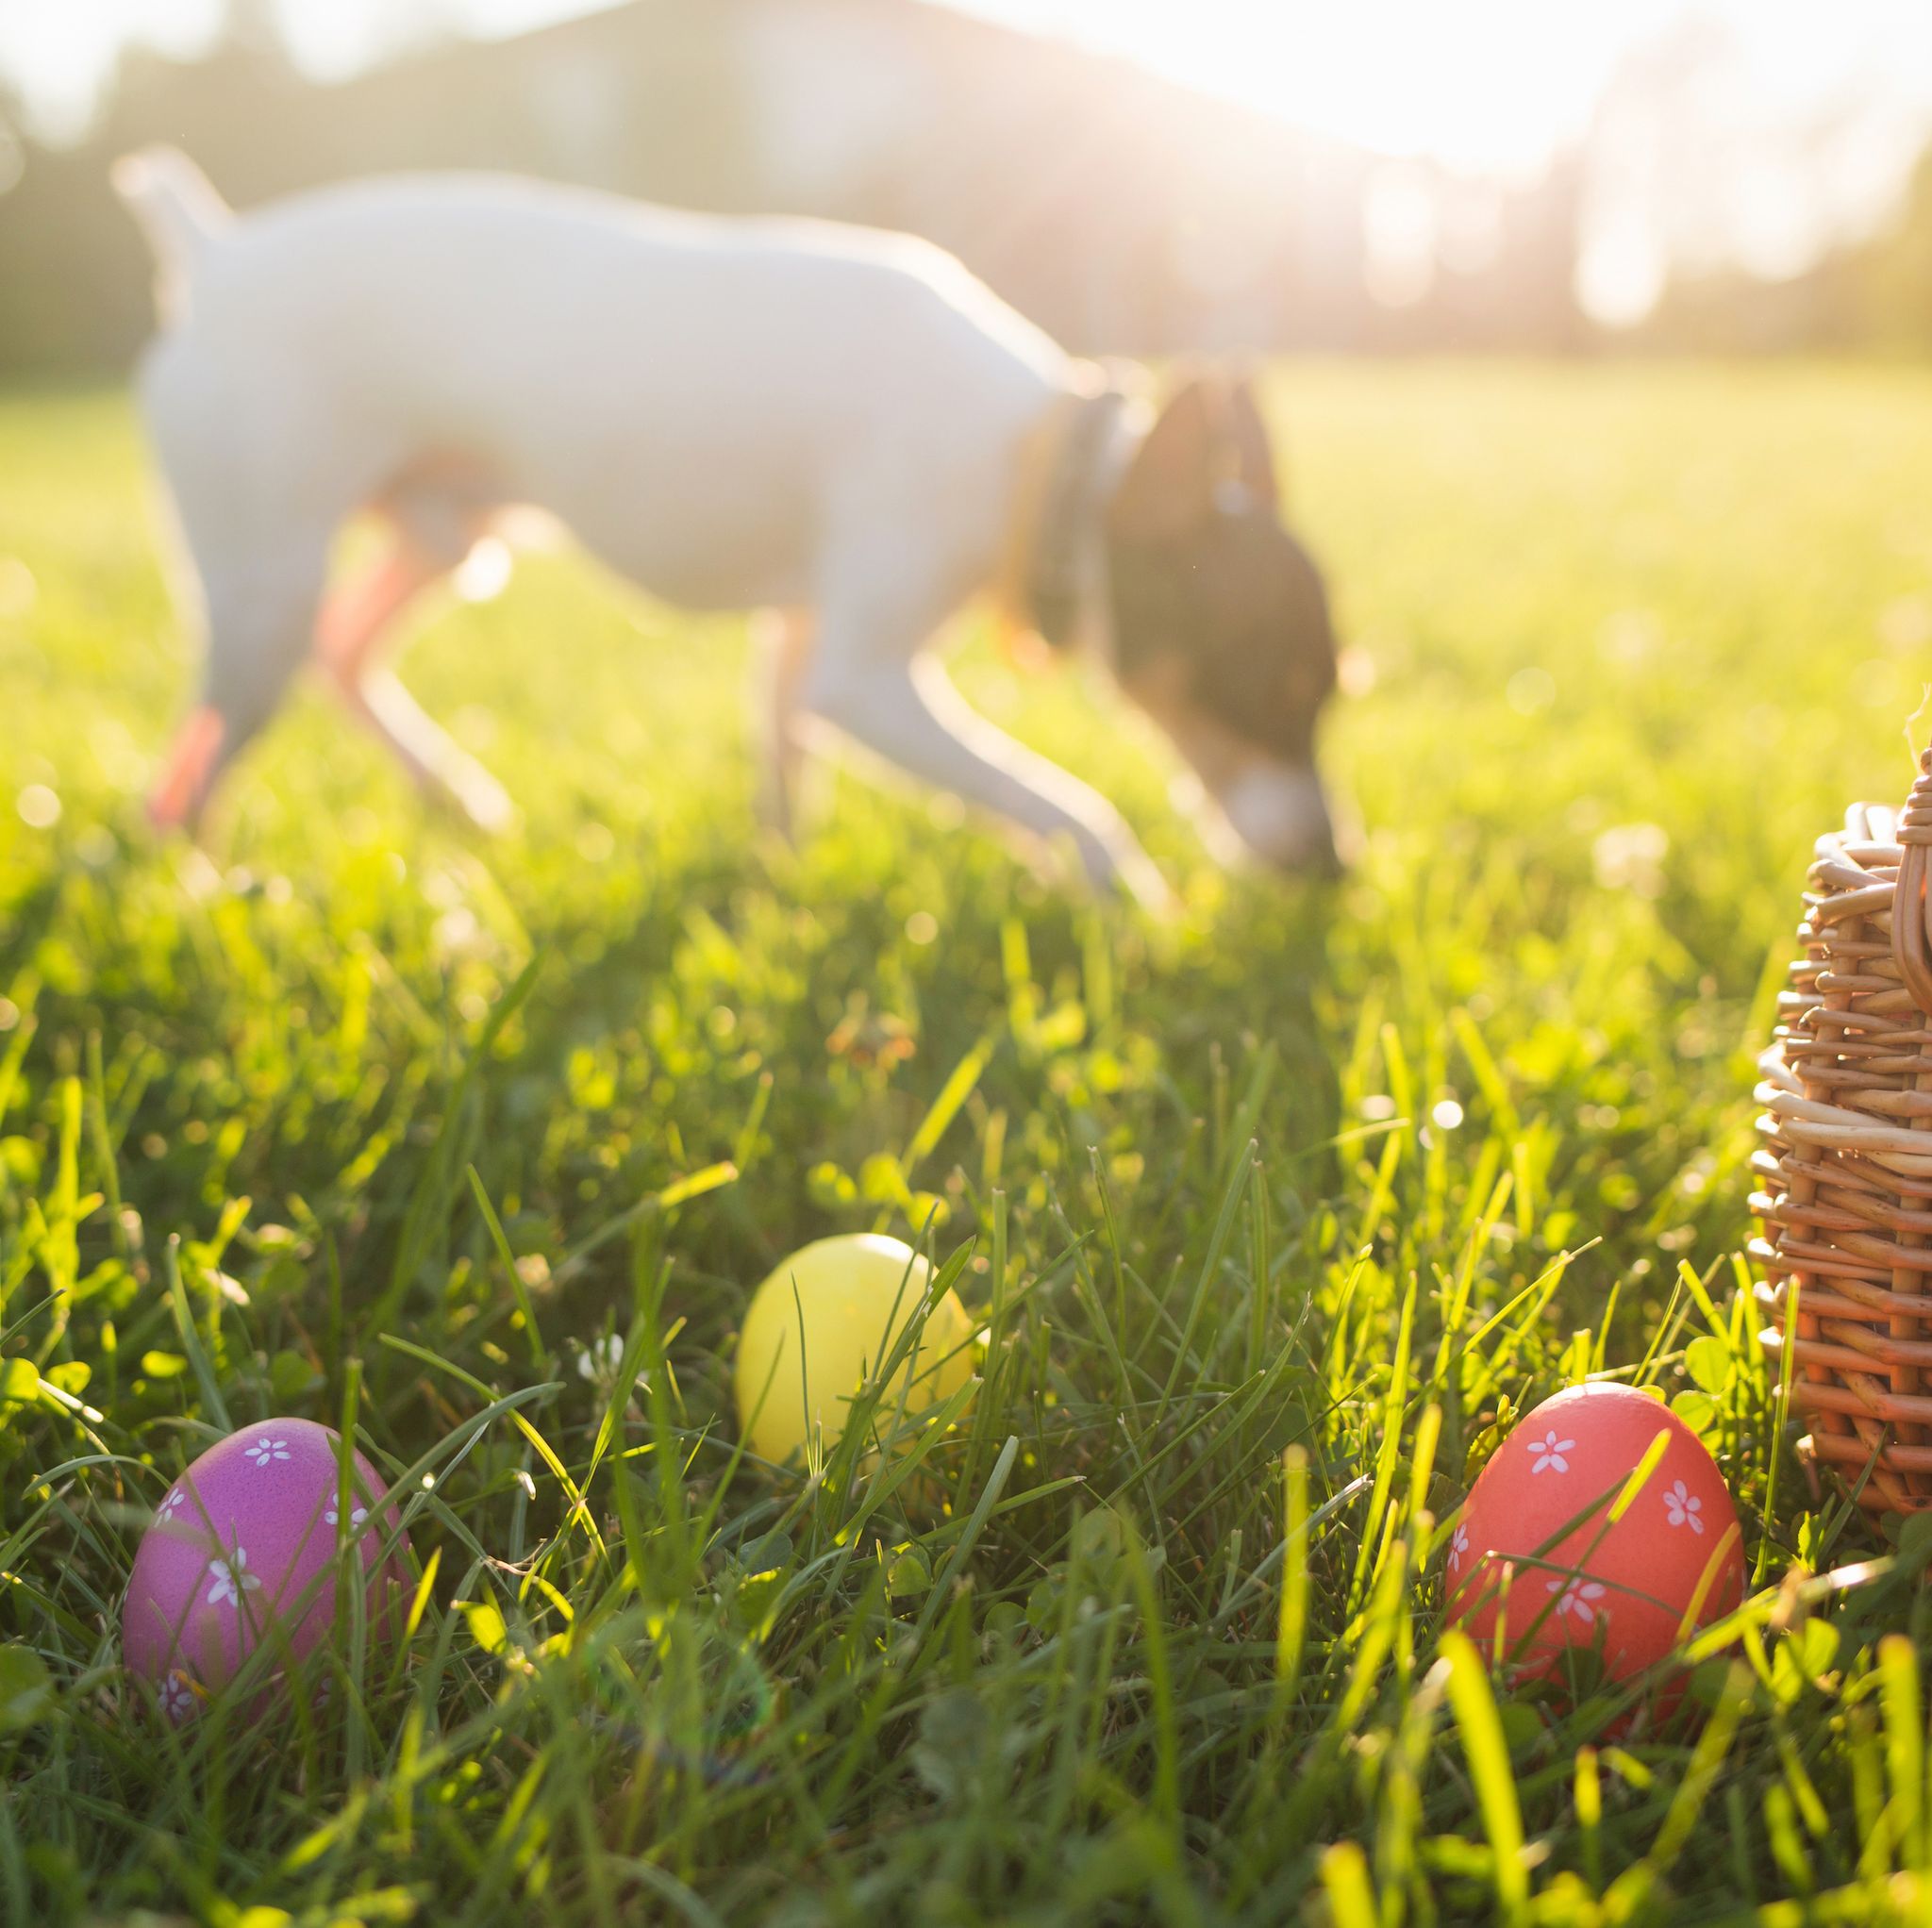 easter eggs in a basket on the grass on a sunny spring day close up running dog in the background